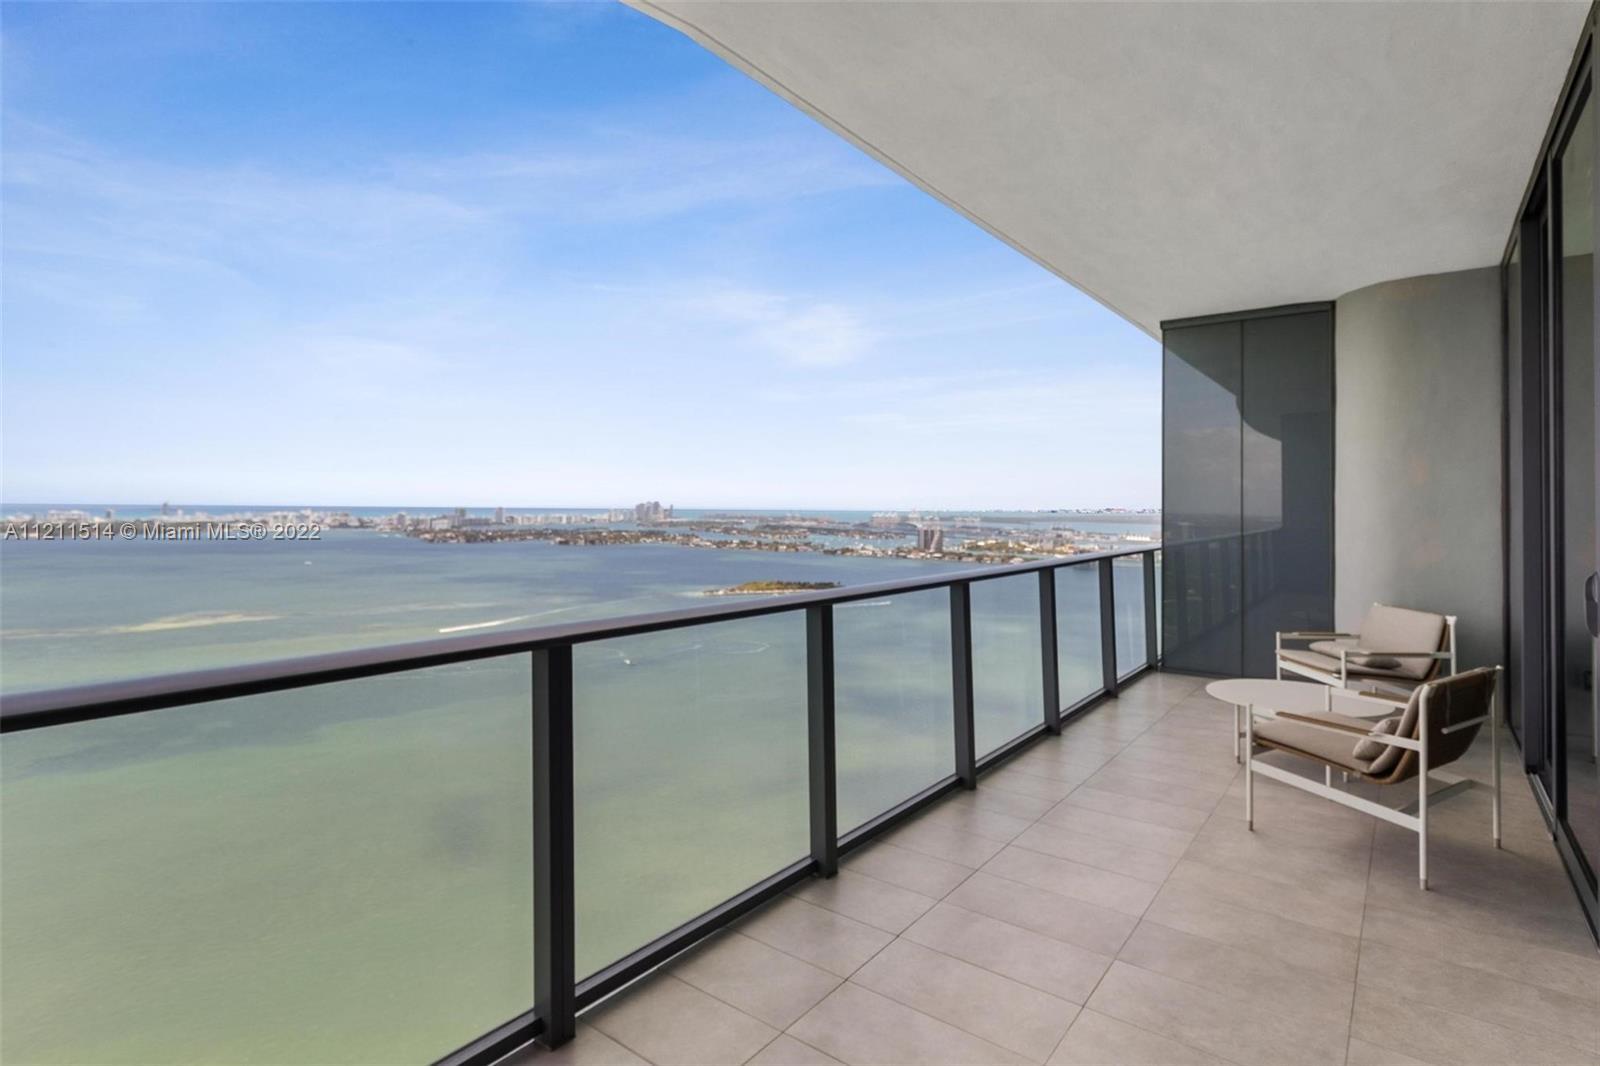 Live in a brand new 2 bedroom and 2 bath unit in a luxury building with outstanding bay and city vie